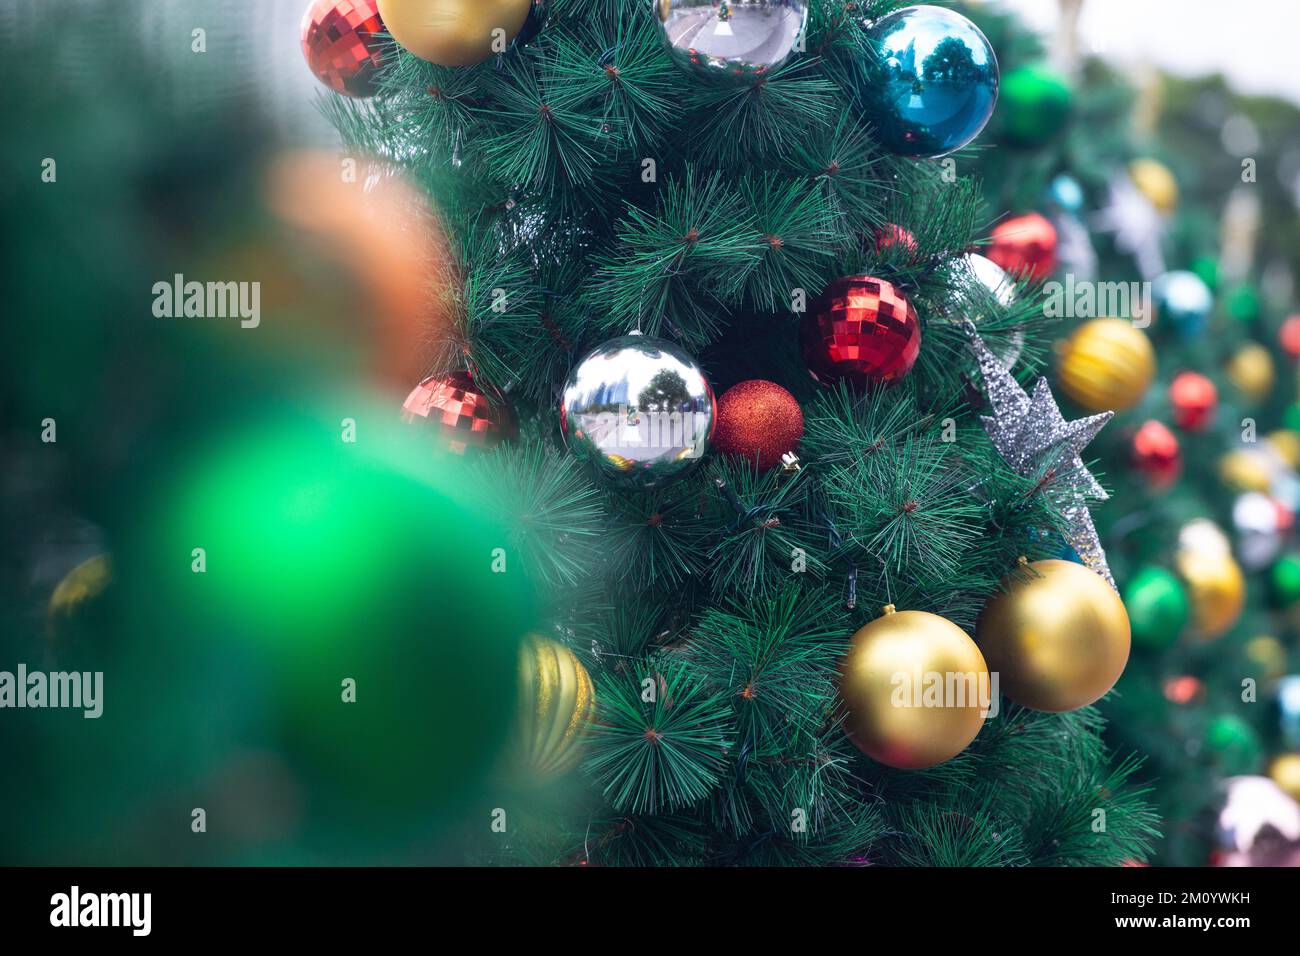 Christmas trees colourful balls decoration at outdoor setting. Stock Photo